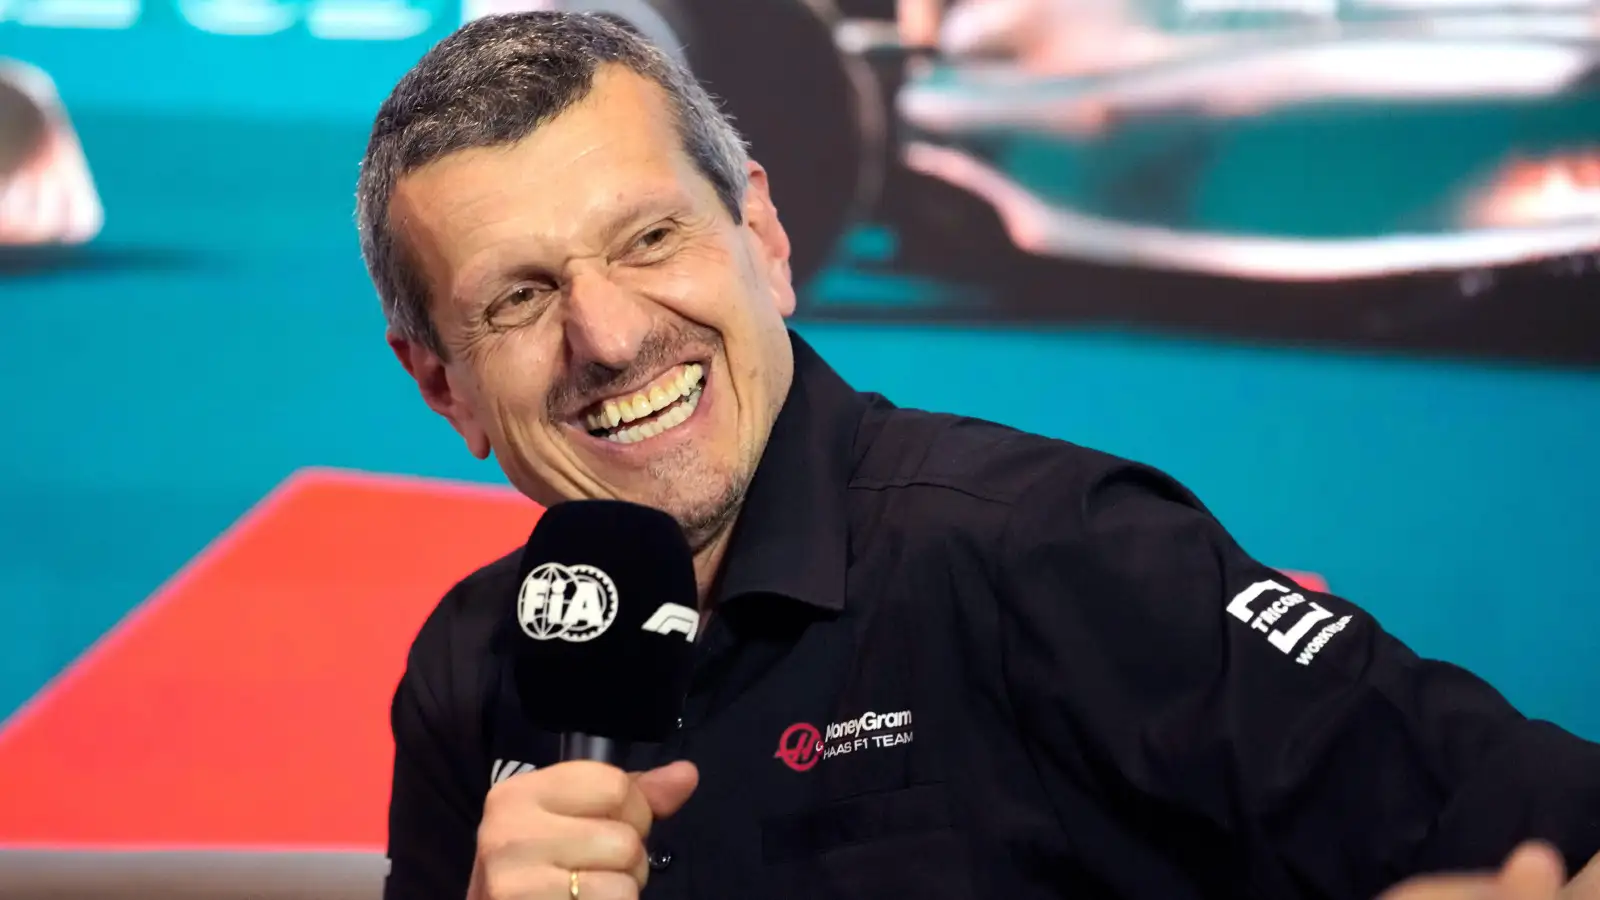 Haas team boss Guenther Steiner at the 2023 Miami Grand Prix.